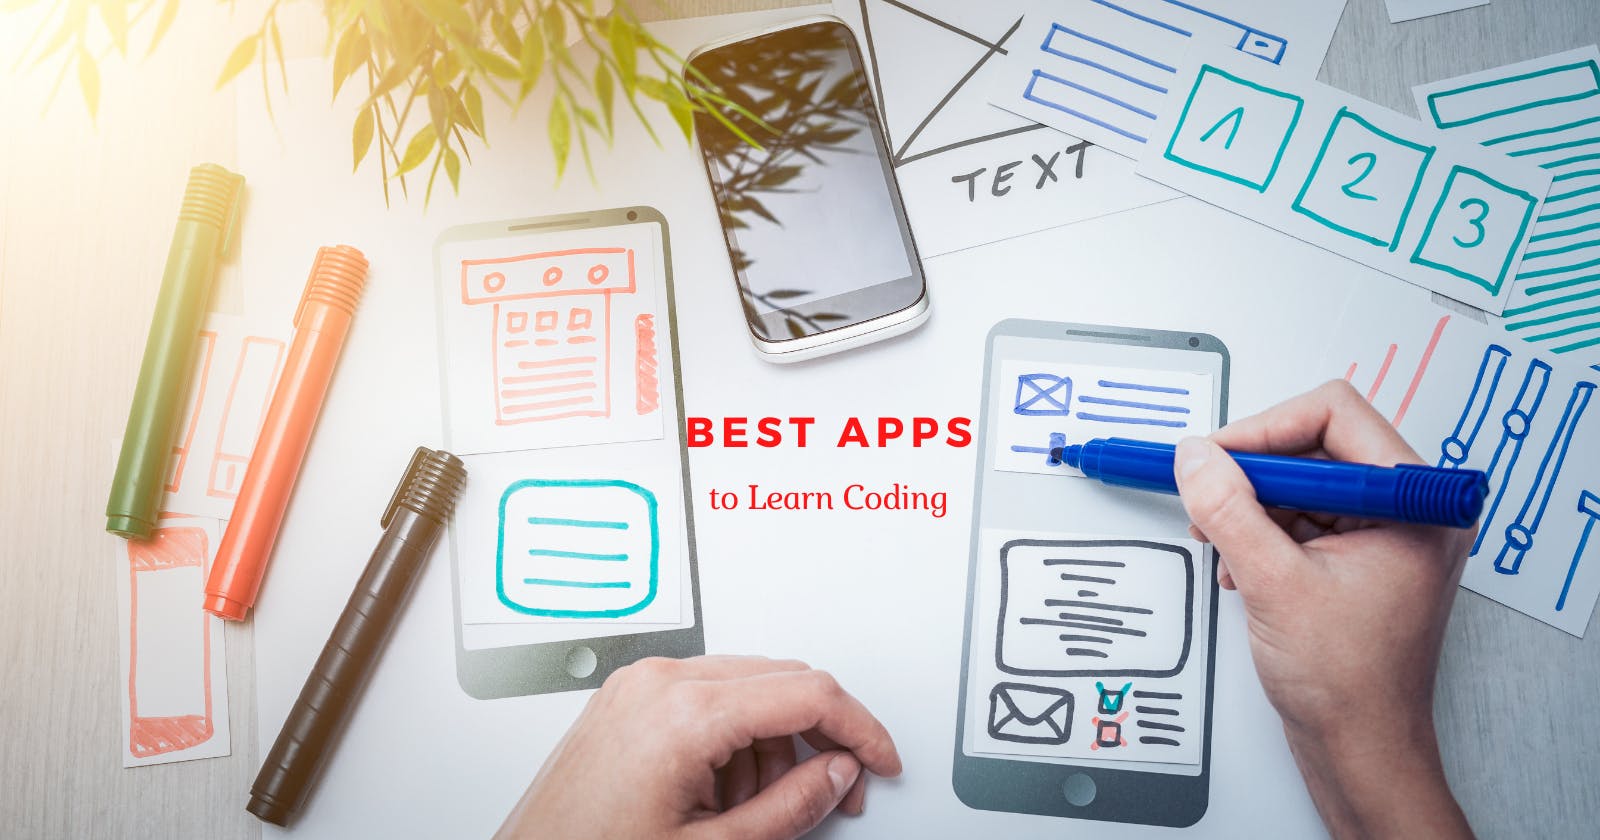 8 Best Apps to Learn Coding